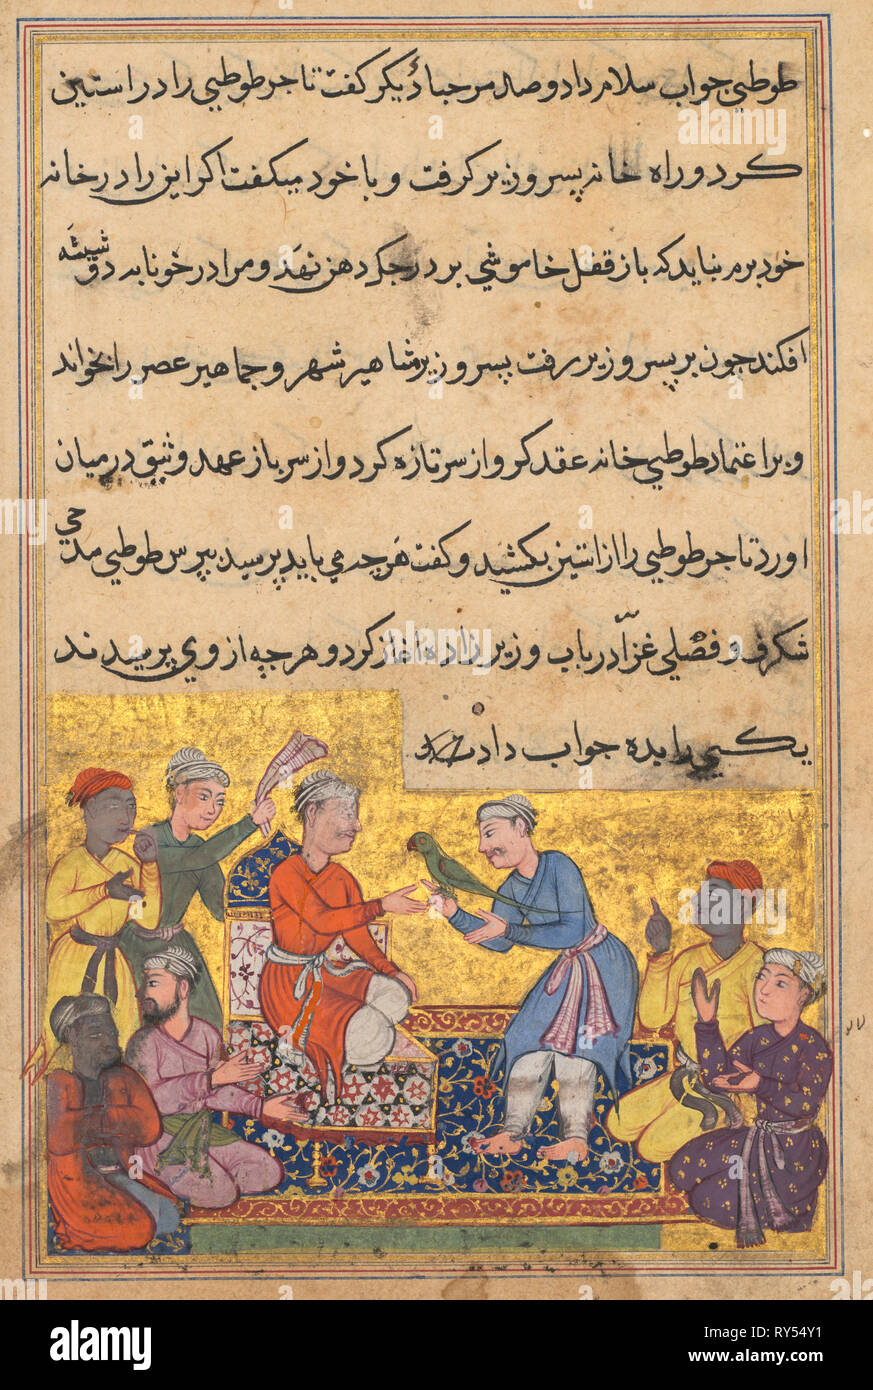 Page from Tales of a Parrot (Tuti-nama): Tenth night: The magic parrot of the merchant’s son talk to the vizier’s son, c. 1560. India, Mughal, Reign of Akbar, 16th century. Opaque watercolor, ink and gold on paper; overall: 20 x 13.2 cm (7 7/8 x 5 3/16 in Stock Photo